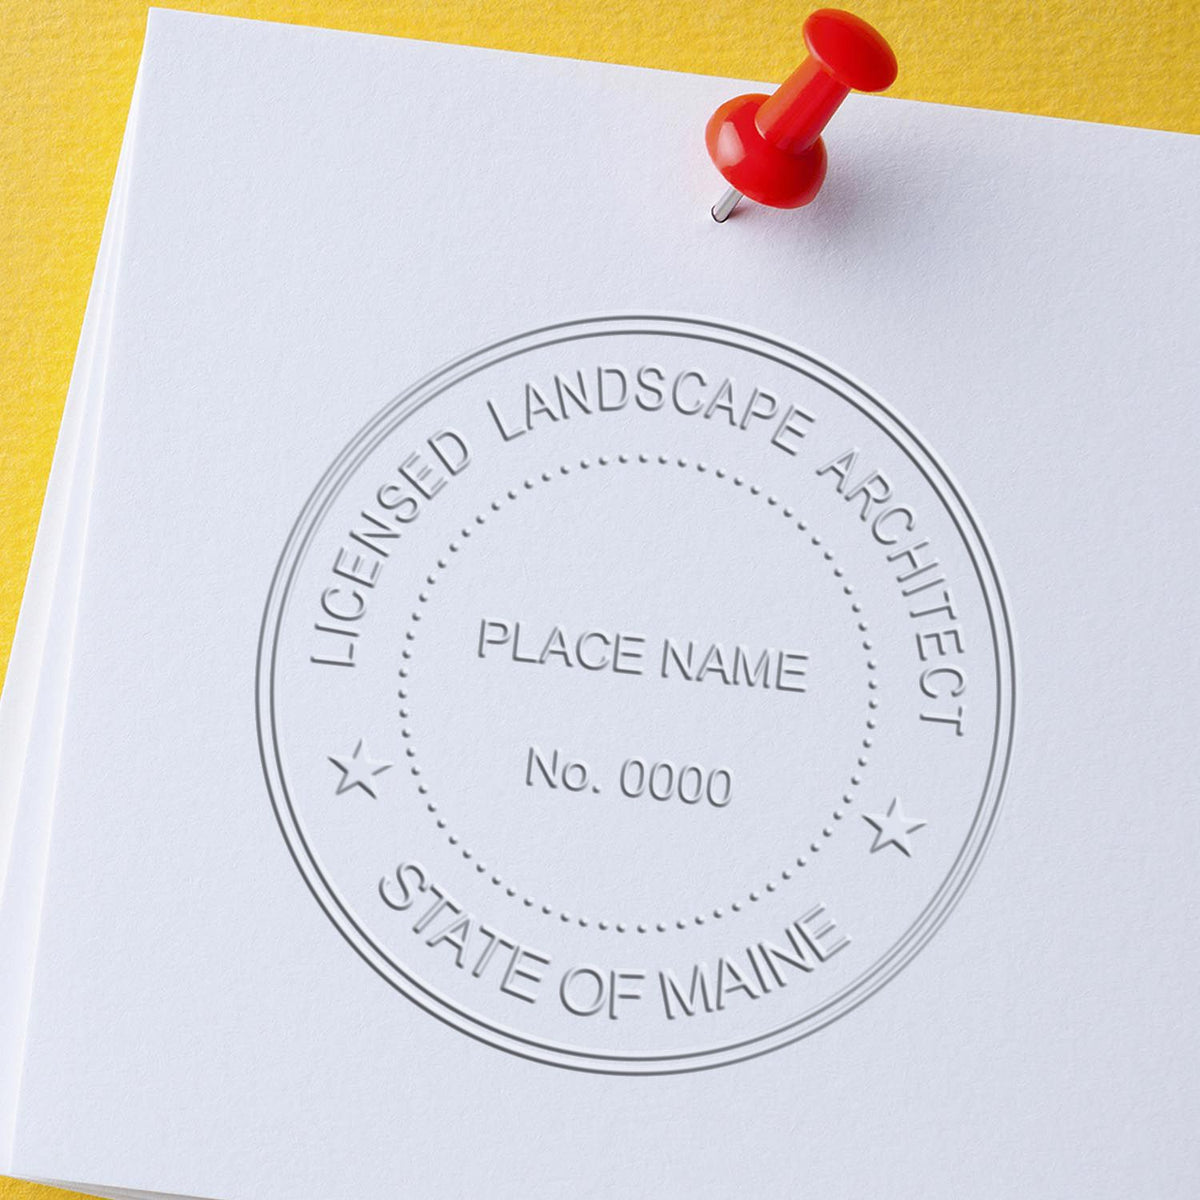 A photograph of the Hybrid Maine Landscape Architect Seal stamp impression reveals a vivid, professional image of the on paper.